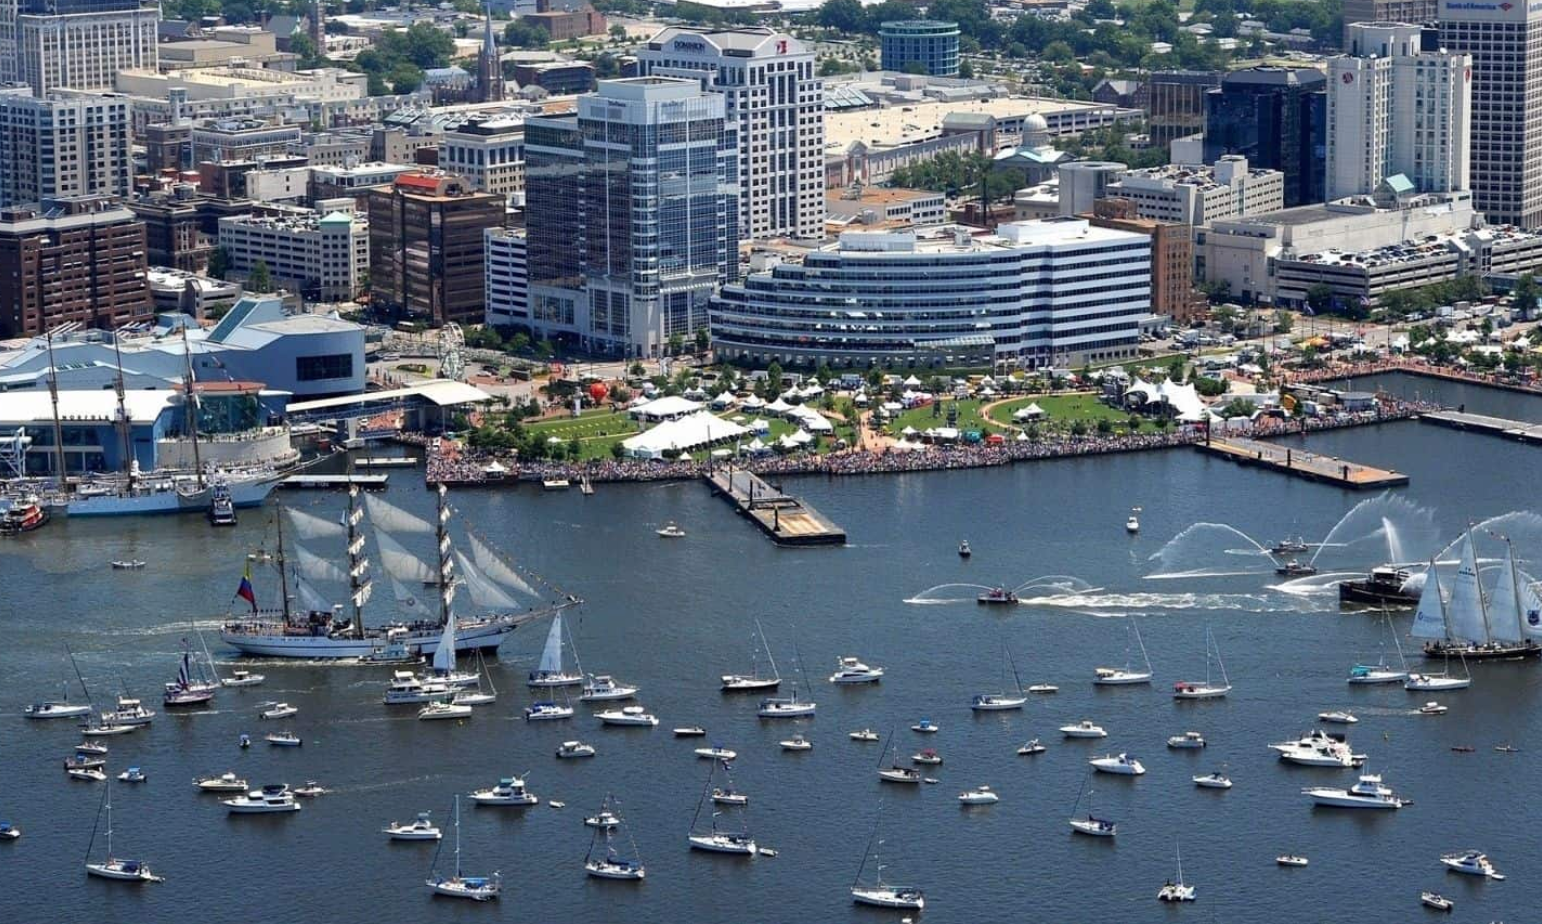 Norfolk Harbor, boats in a harbor, crowded waterway